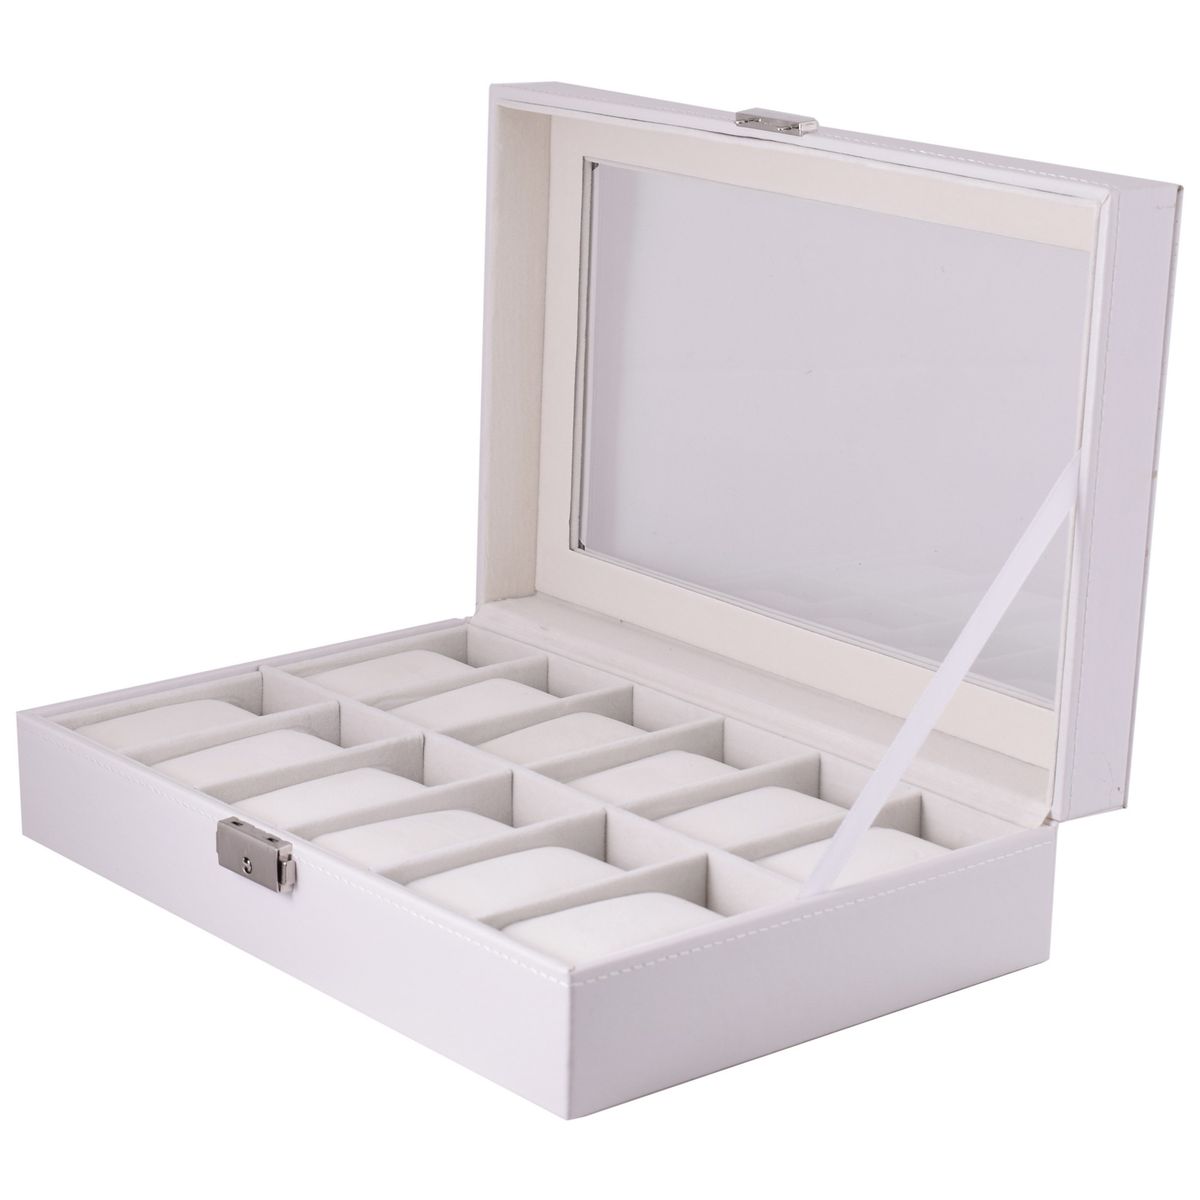 (12-Slot) PU Leather Design Watch Box - White. | Shop Today. Get it ...